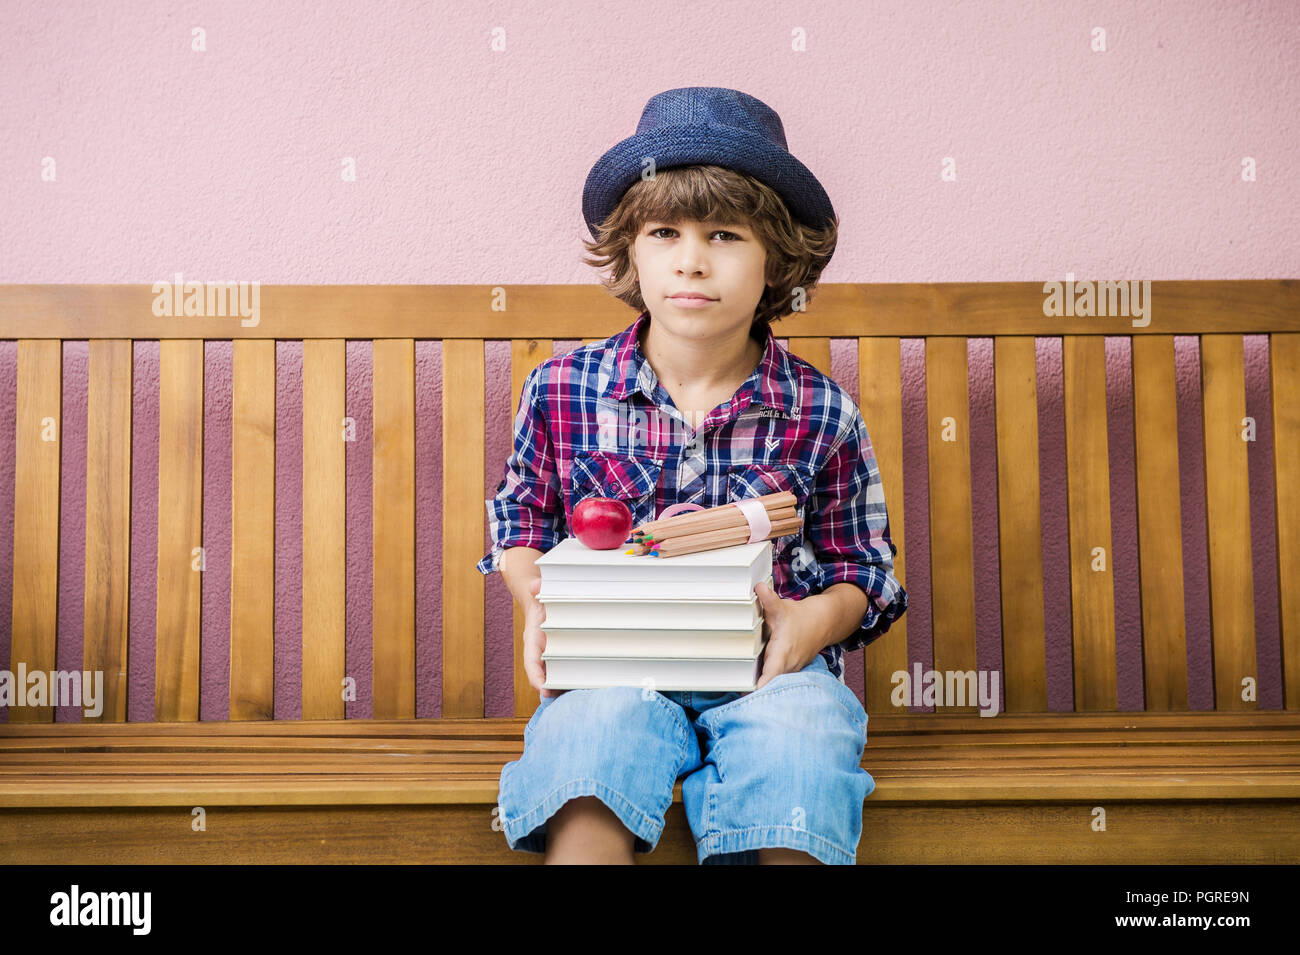 Little boy holding stack of books ready to go back to school. Stock Photo